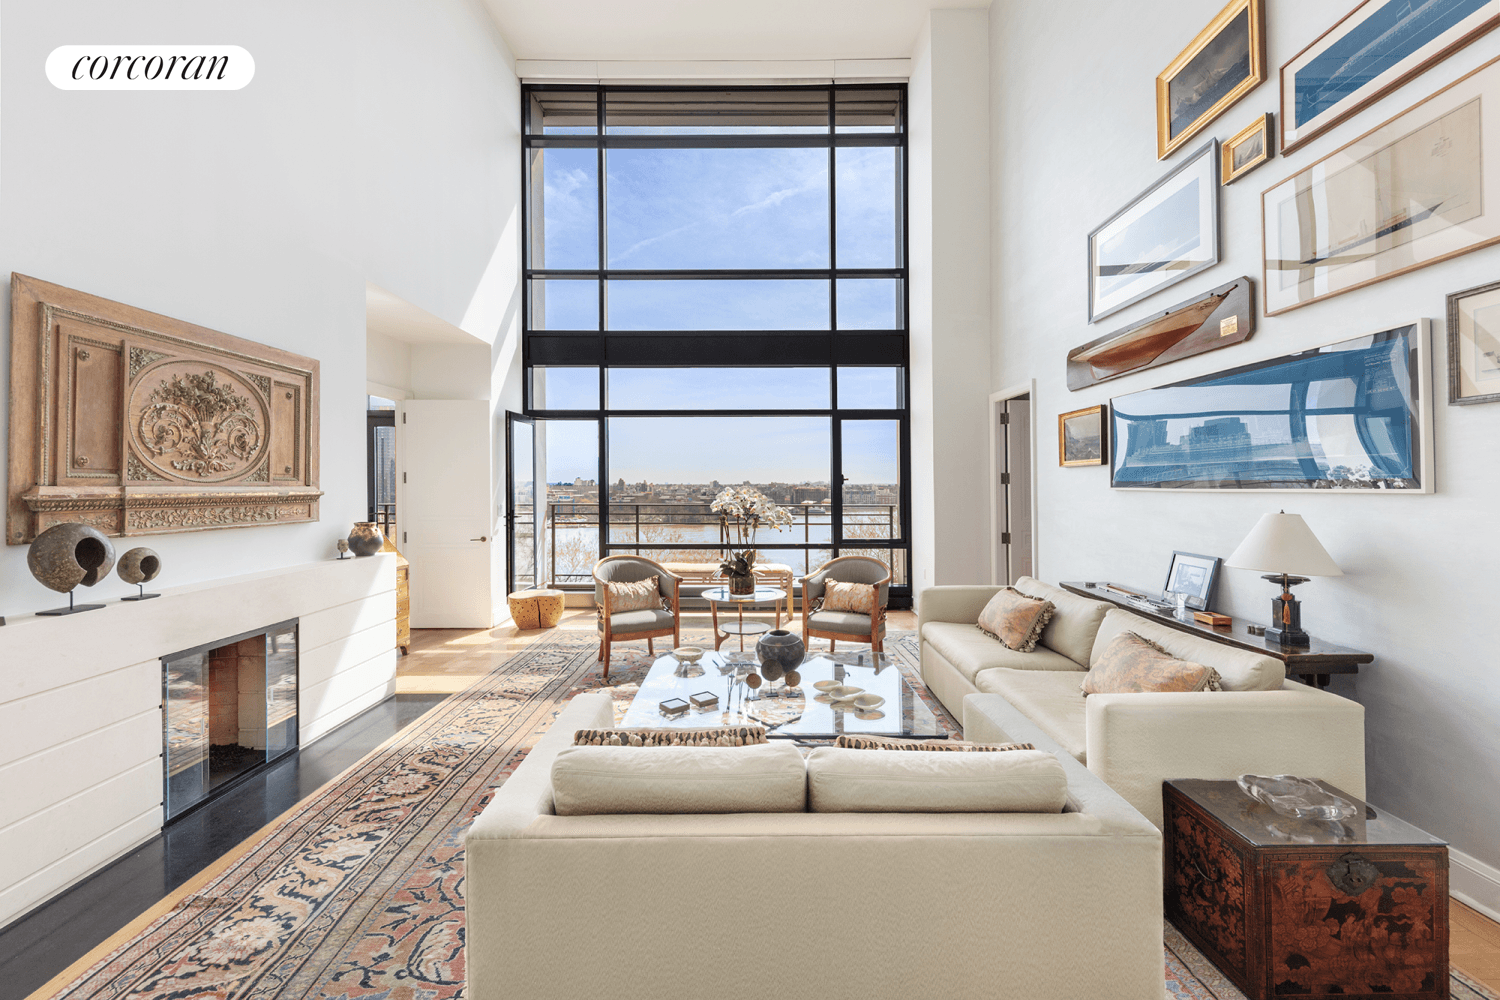 This magnificent loft like duplex features three bedrooms, three ensuite bathrooms and an elegant powder room.